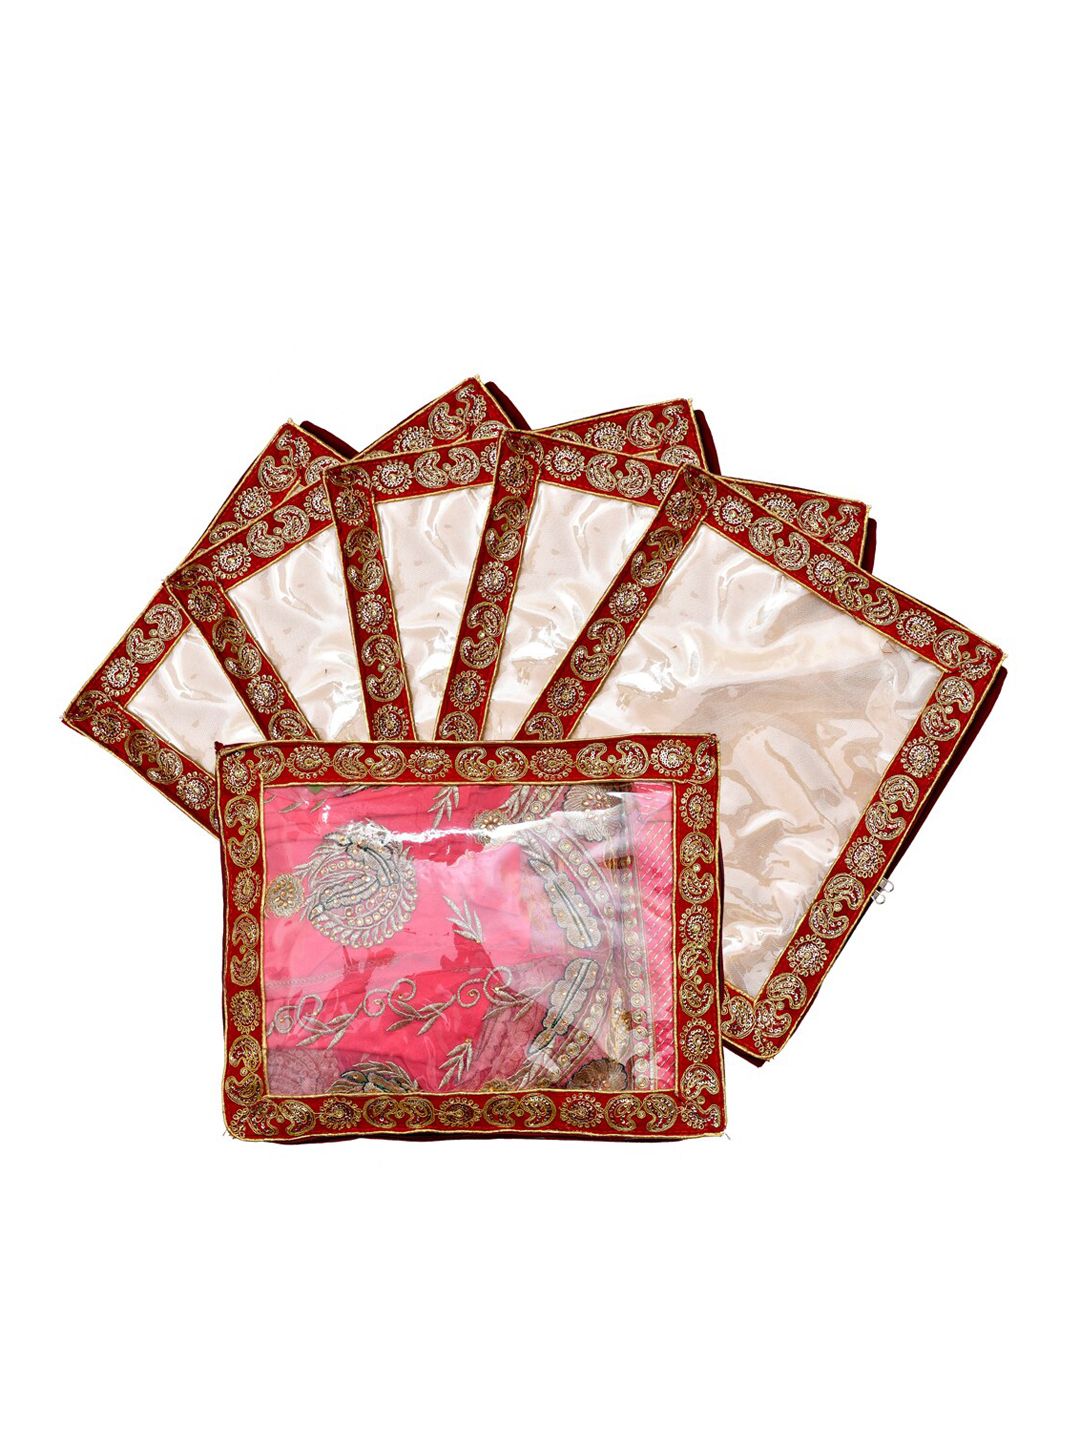 Kuber Industries Set Of 6 Red & Transparent Embellished Single Packing Saree Cover Organizers Price in India